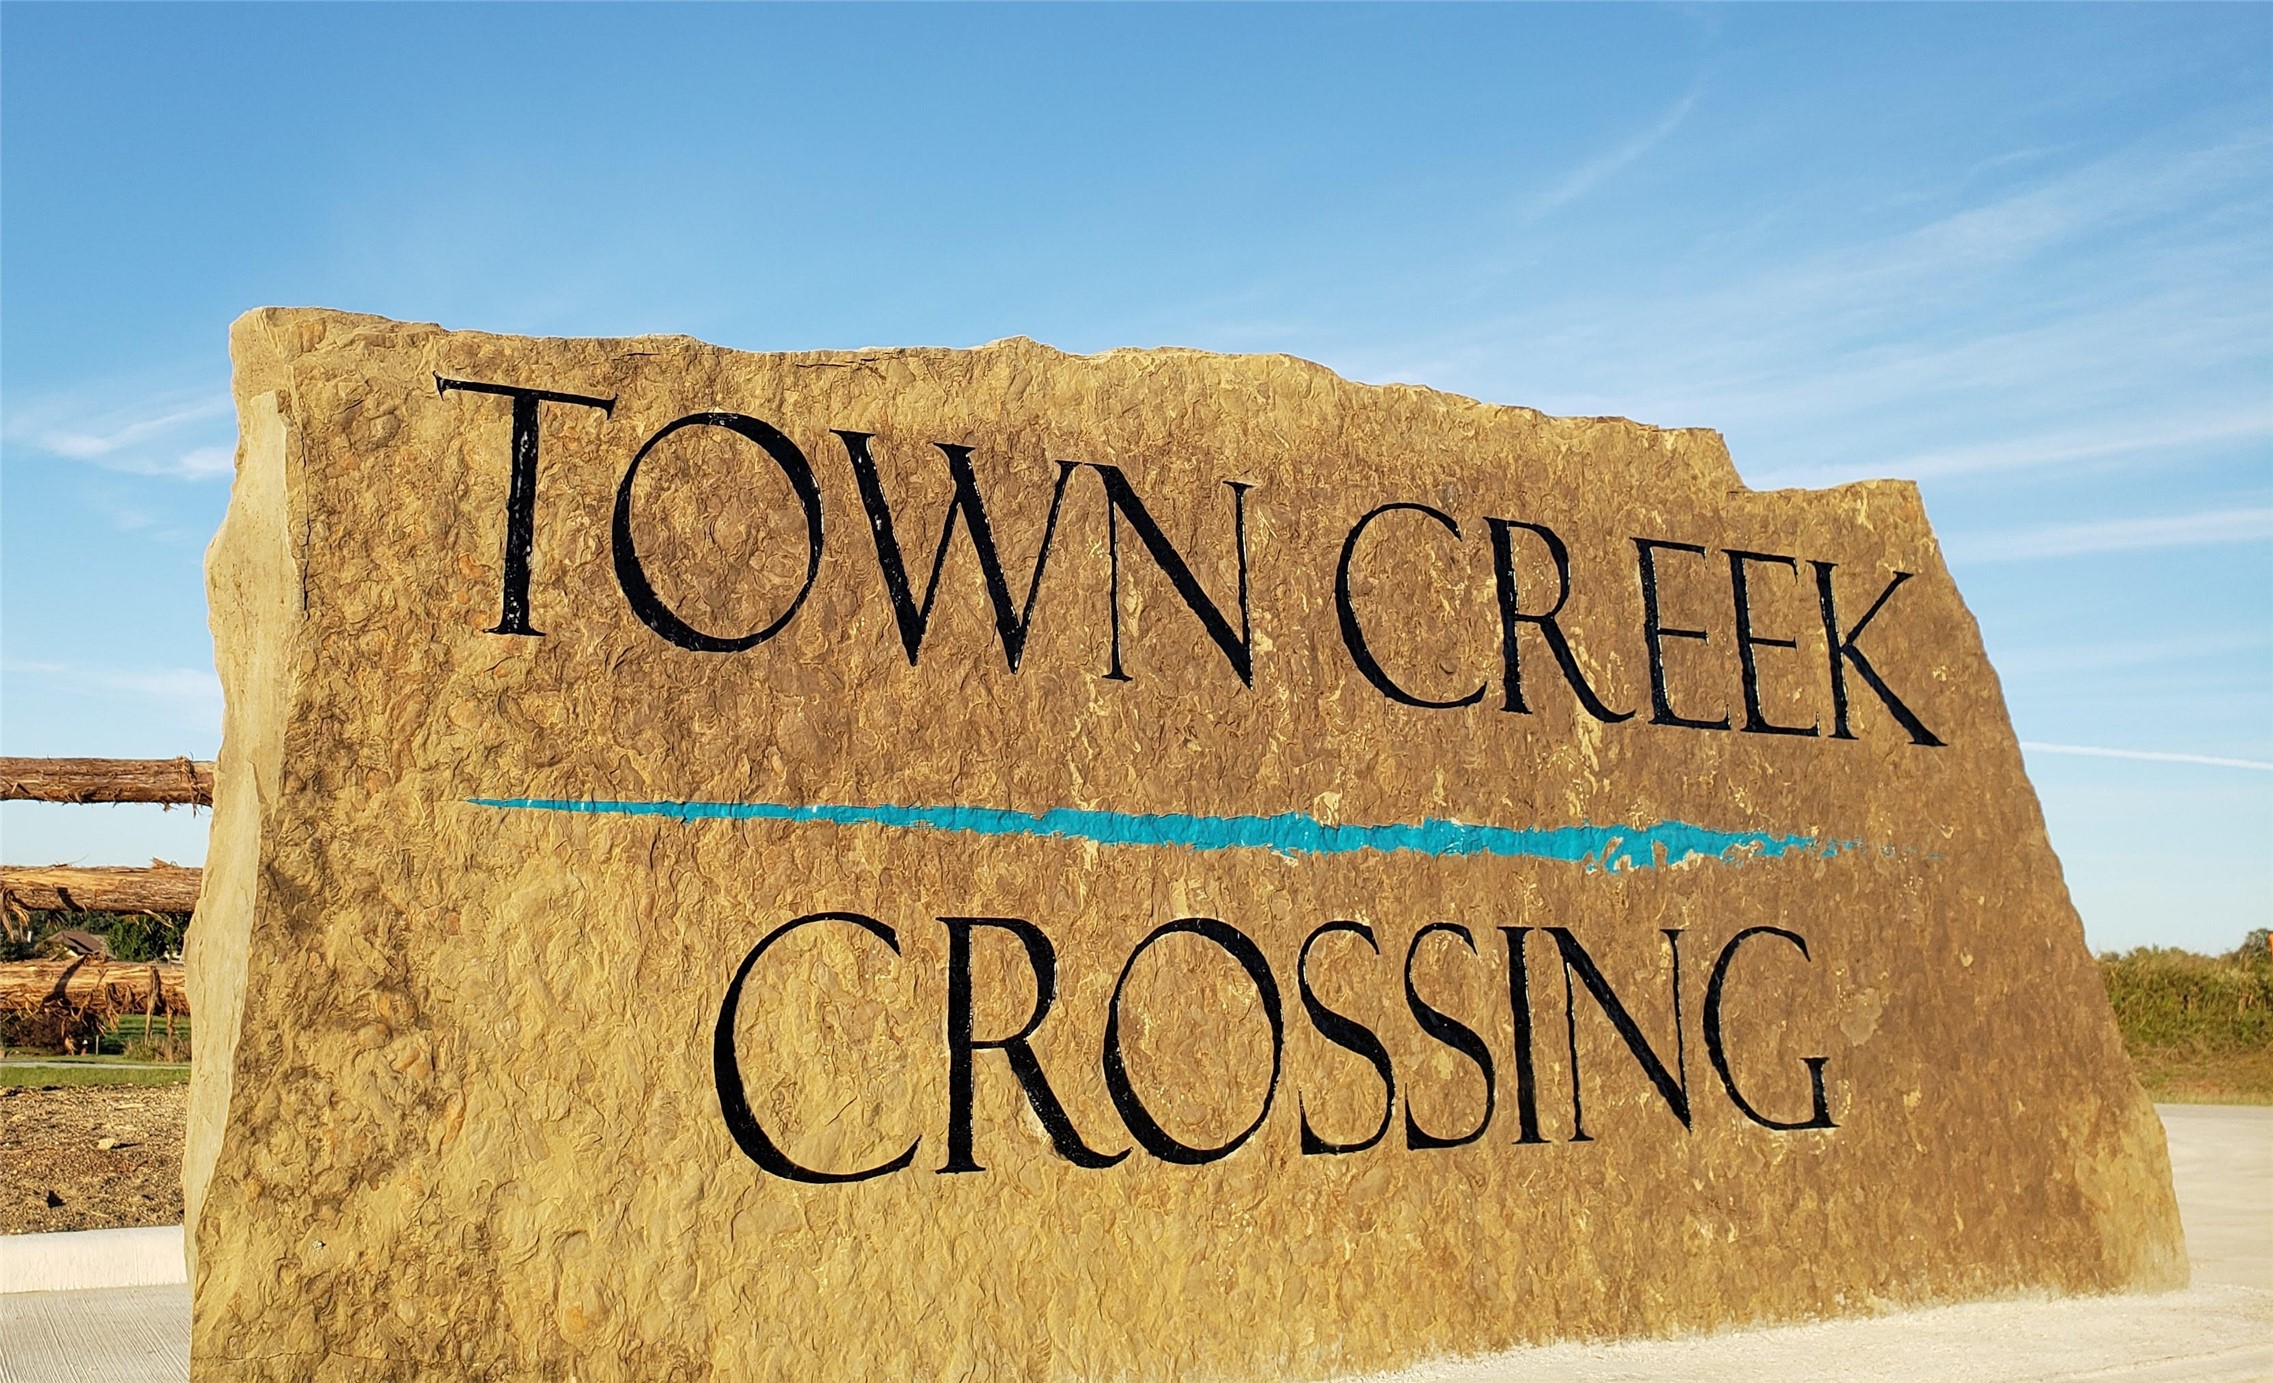 Town Creek Crossing is a new home community located in Montgomery, TX. Located near Lone Star Parkway and Buffalo Springs Drive, Town Creek Crossing offers families small town charm and rustic surroundings. Lake Conroe lies just minutes away, providing various activities and attractions such as Margaritaville Lake Resort, Lake Conroe Park and sweeping golf courses.